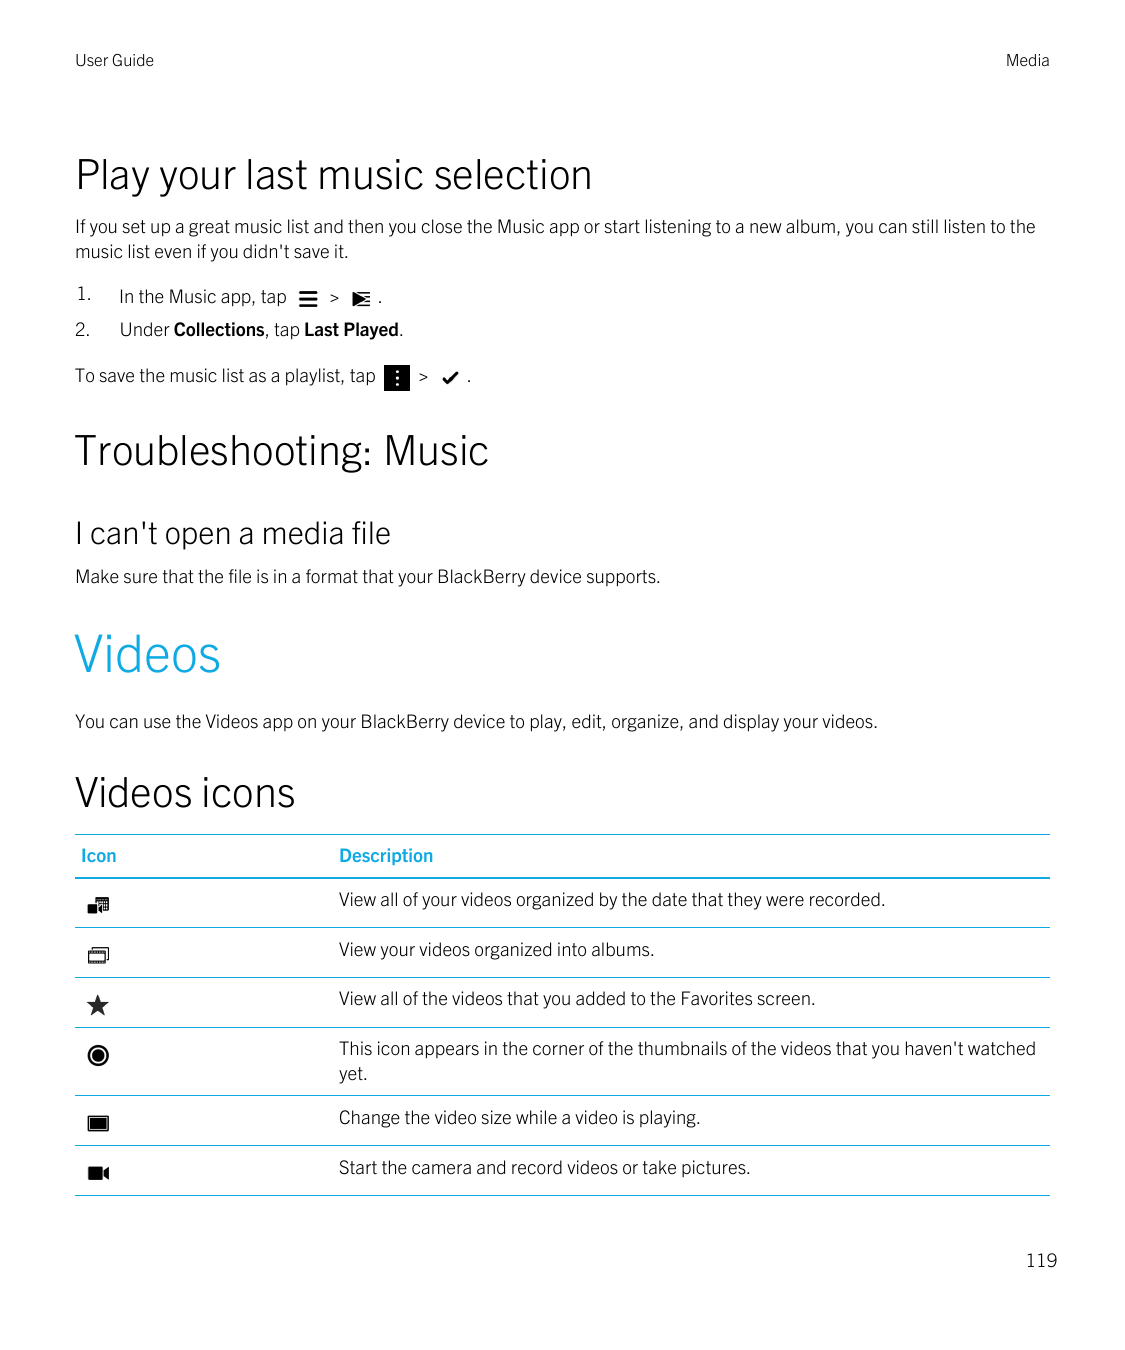 User GuideMediaPlay your last music selectionIf you set up a great music list and then you close the Music app or start listenin